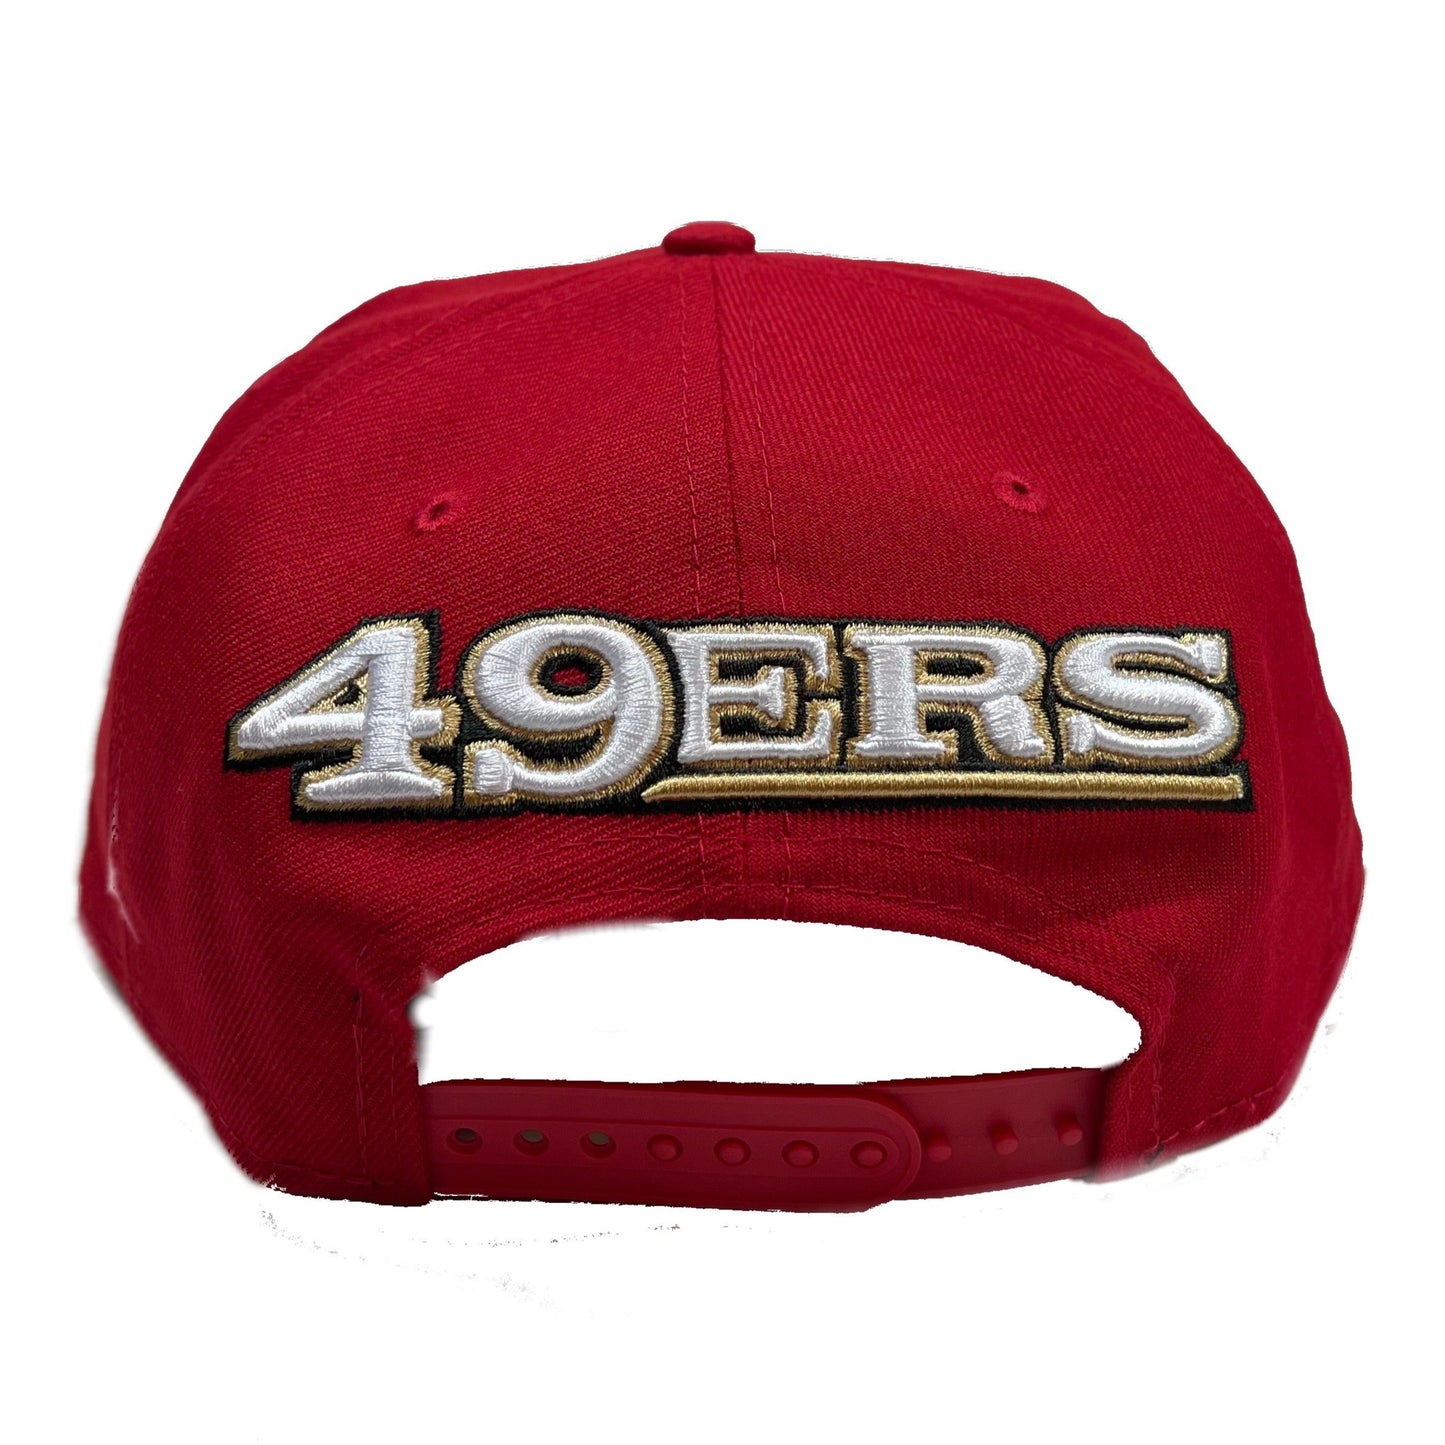 San Fransisco 49ers Double Logo (Red) Snapback